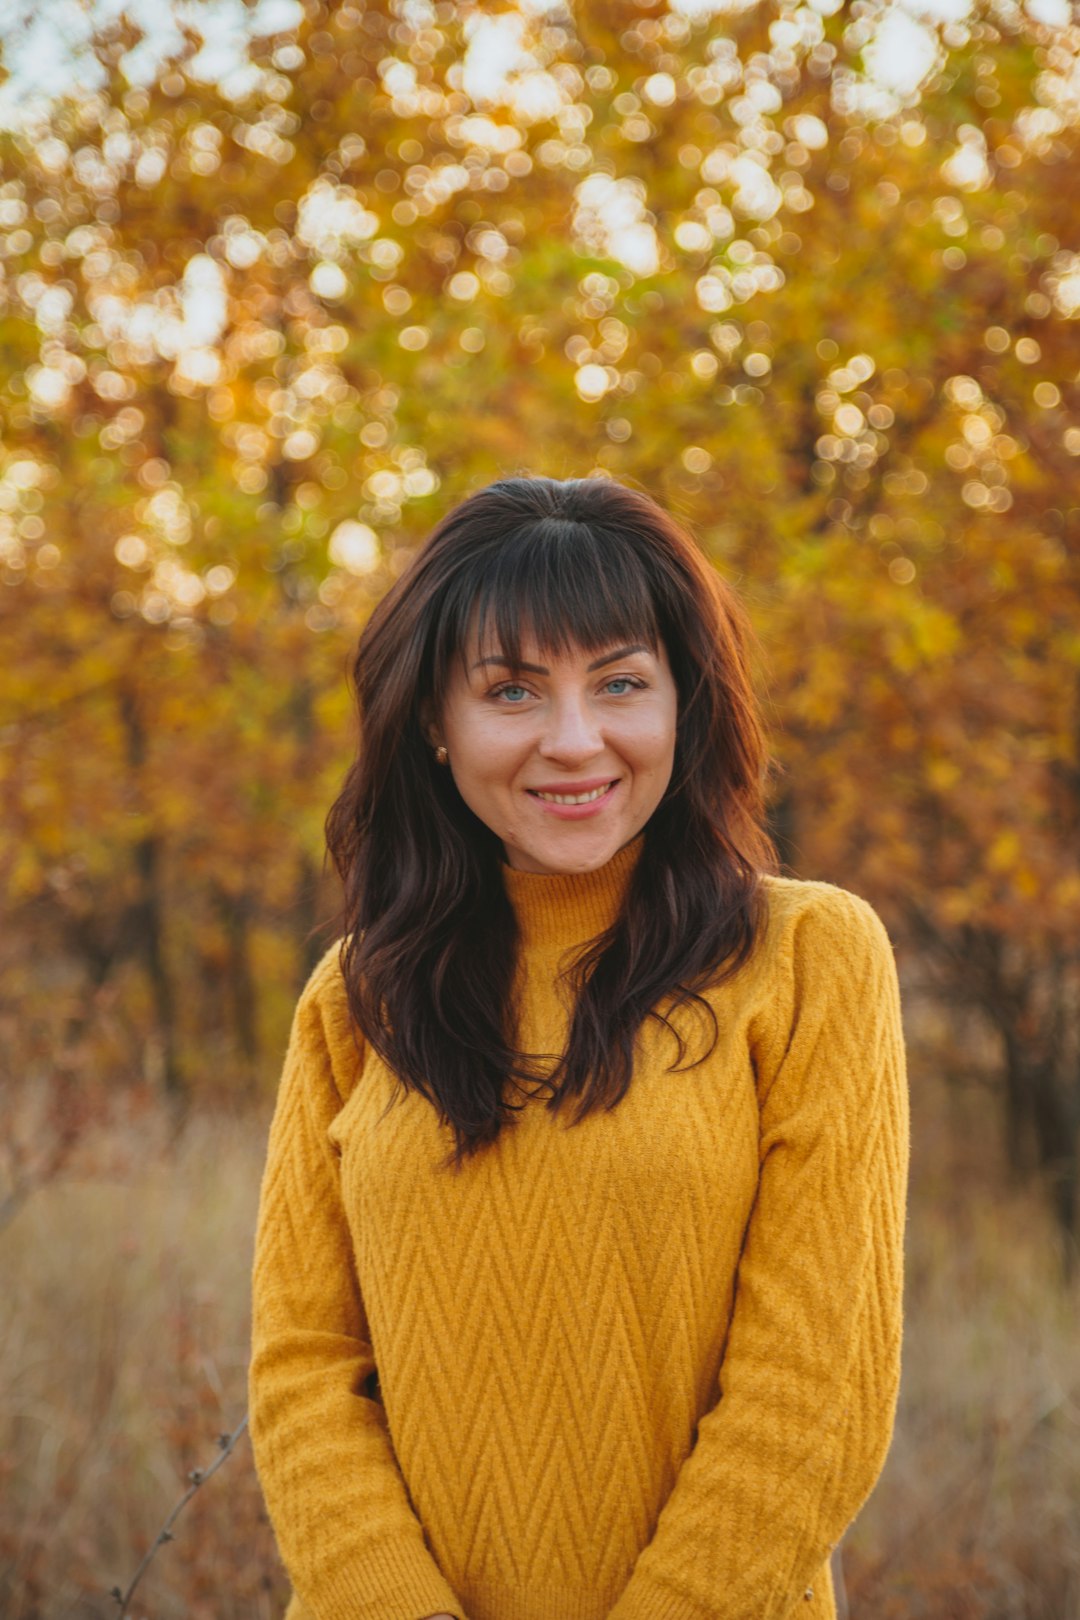 woman in yellow sweater smiling